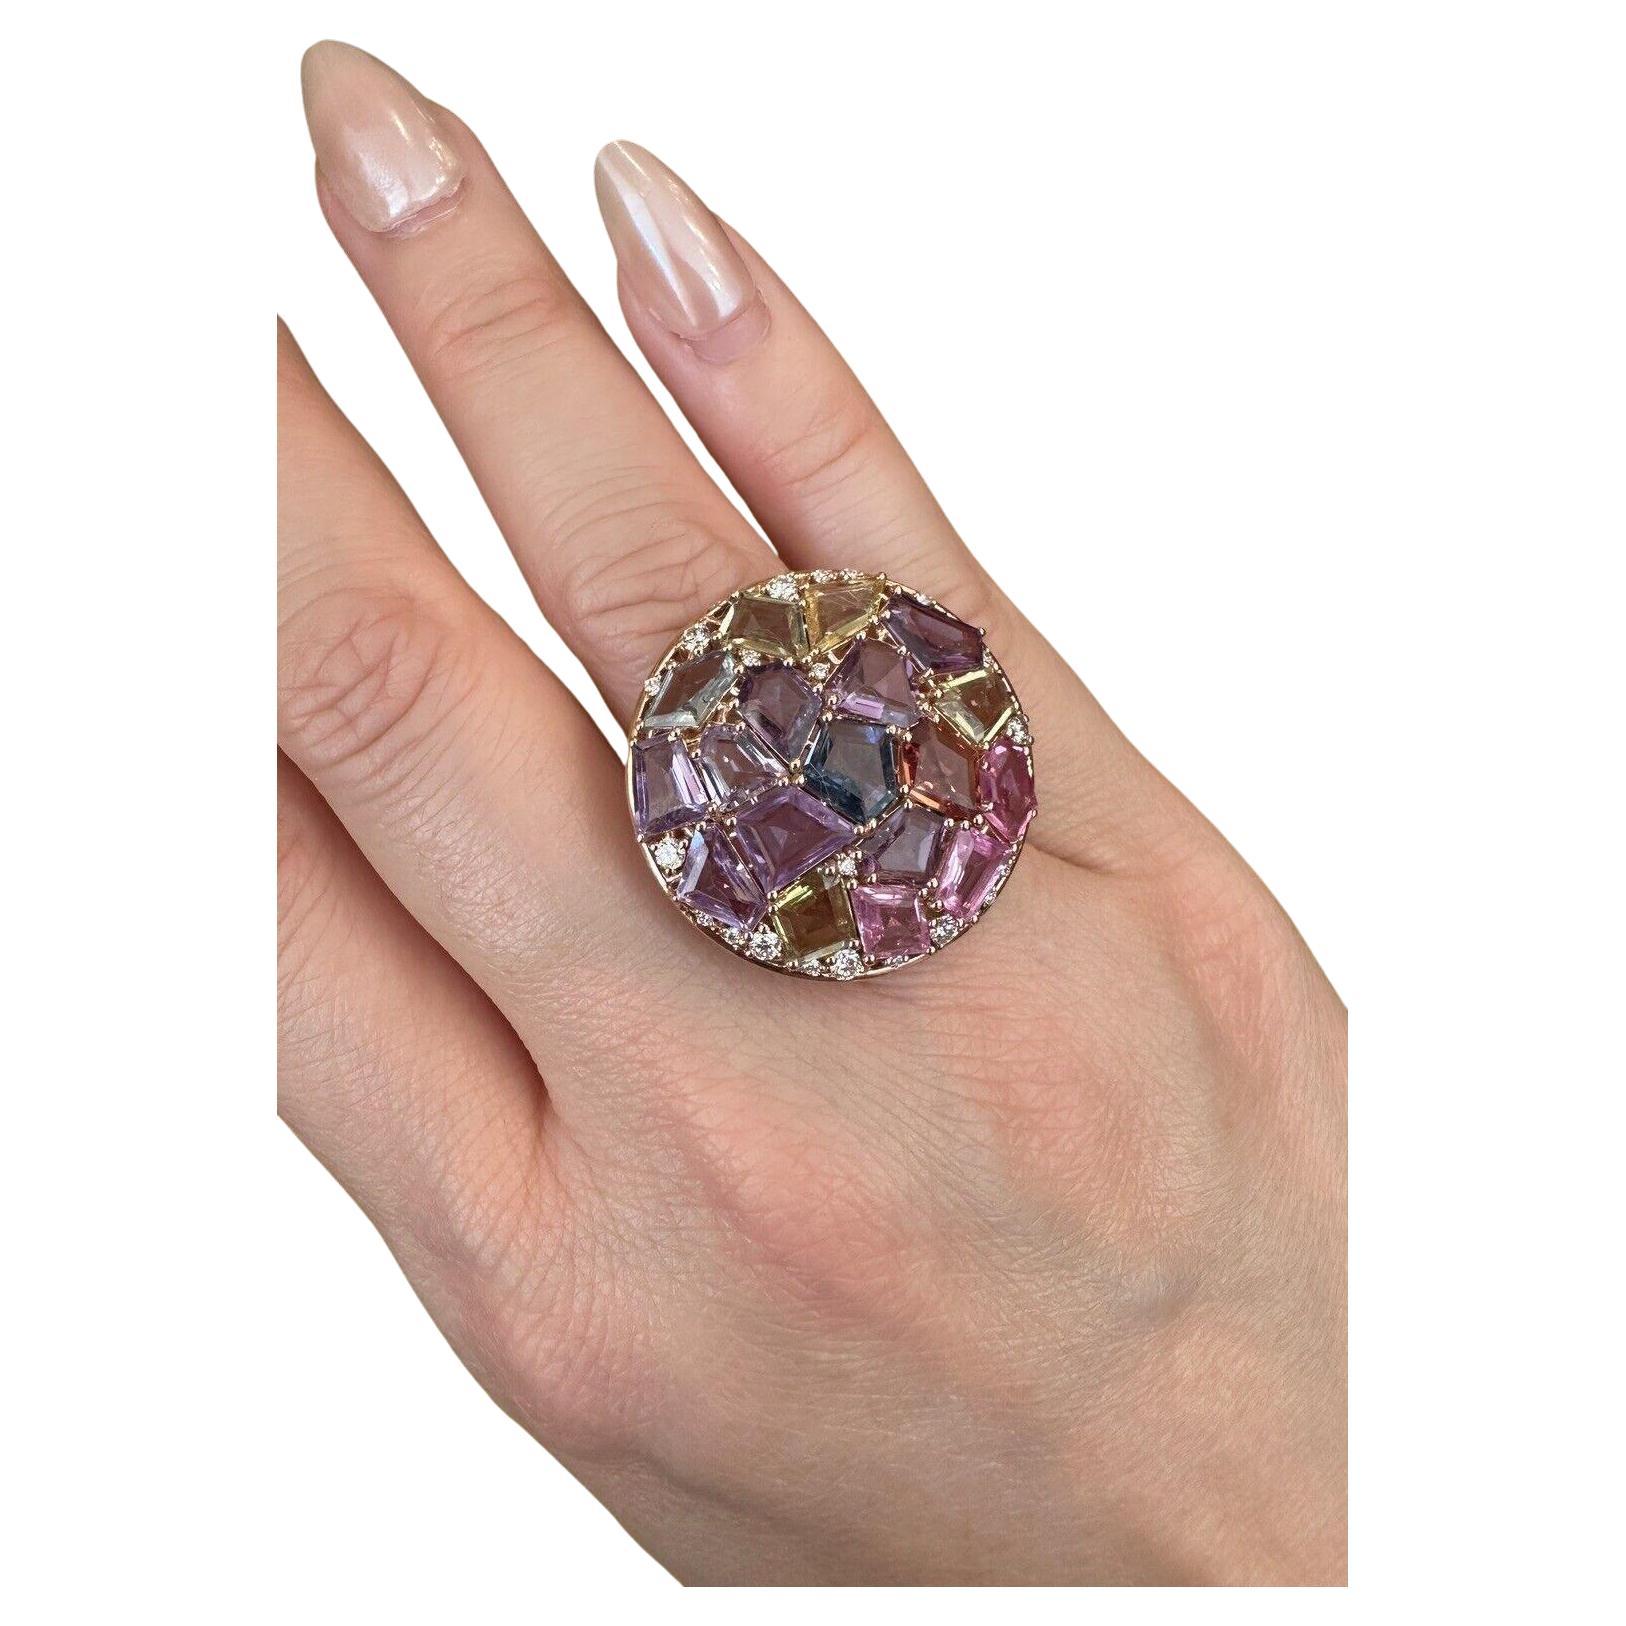 Large Multicolor Sapphire and Diamond Statement Ring in 18k Rose Gold 

Sapphire and Diamond Cocktail Ring features Natural Multicolored Sapphires with Fancy-shapes and Pastel hues set in a round, slightly domed setting with rows of Round Diamonds